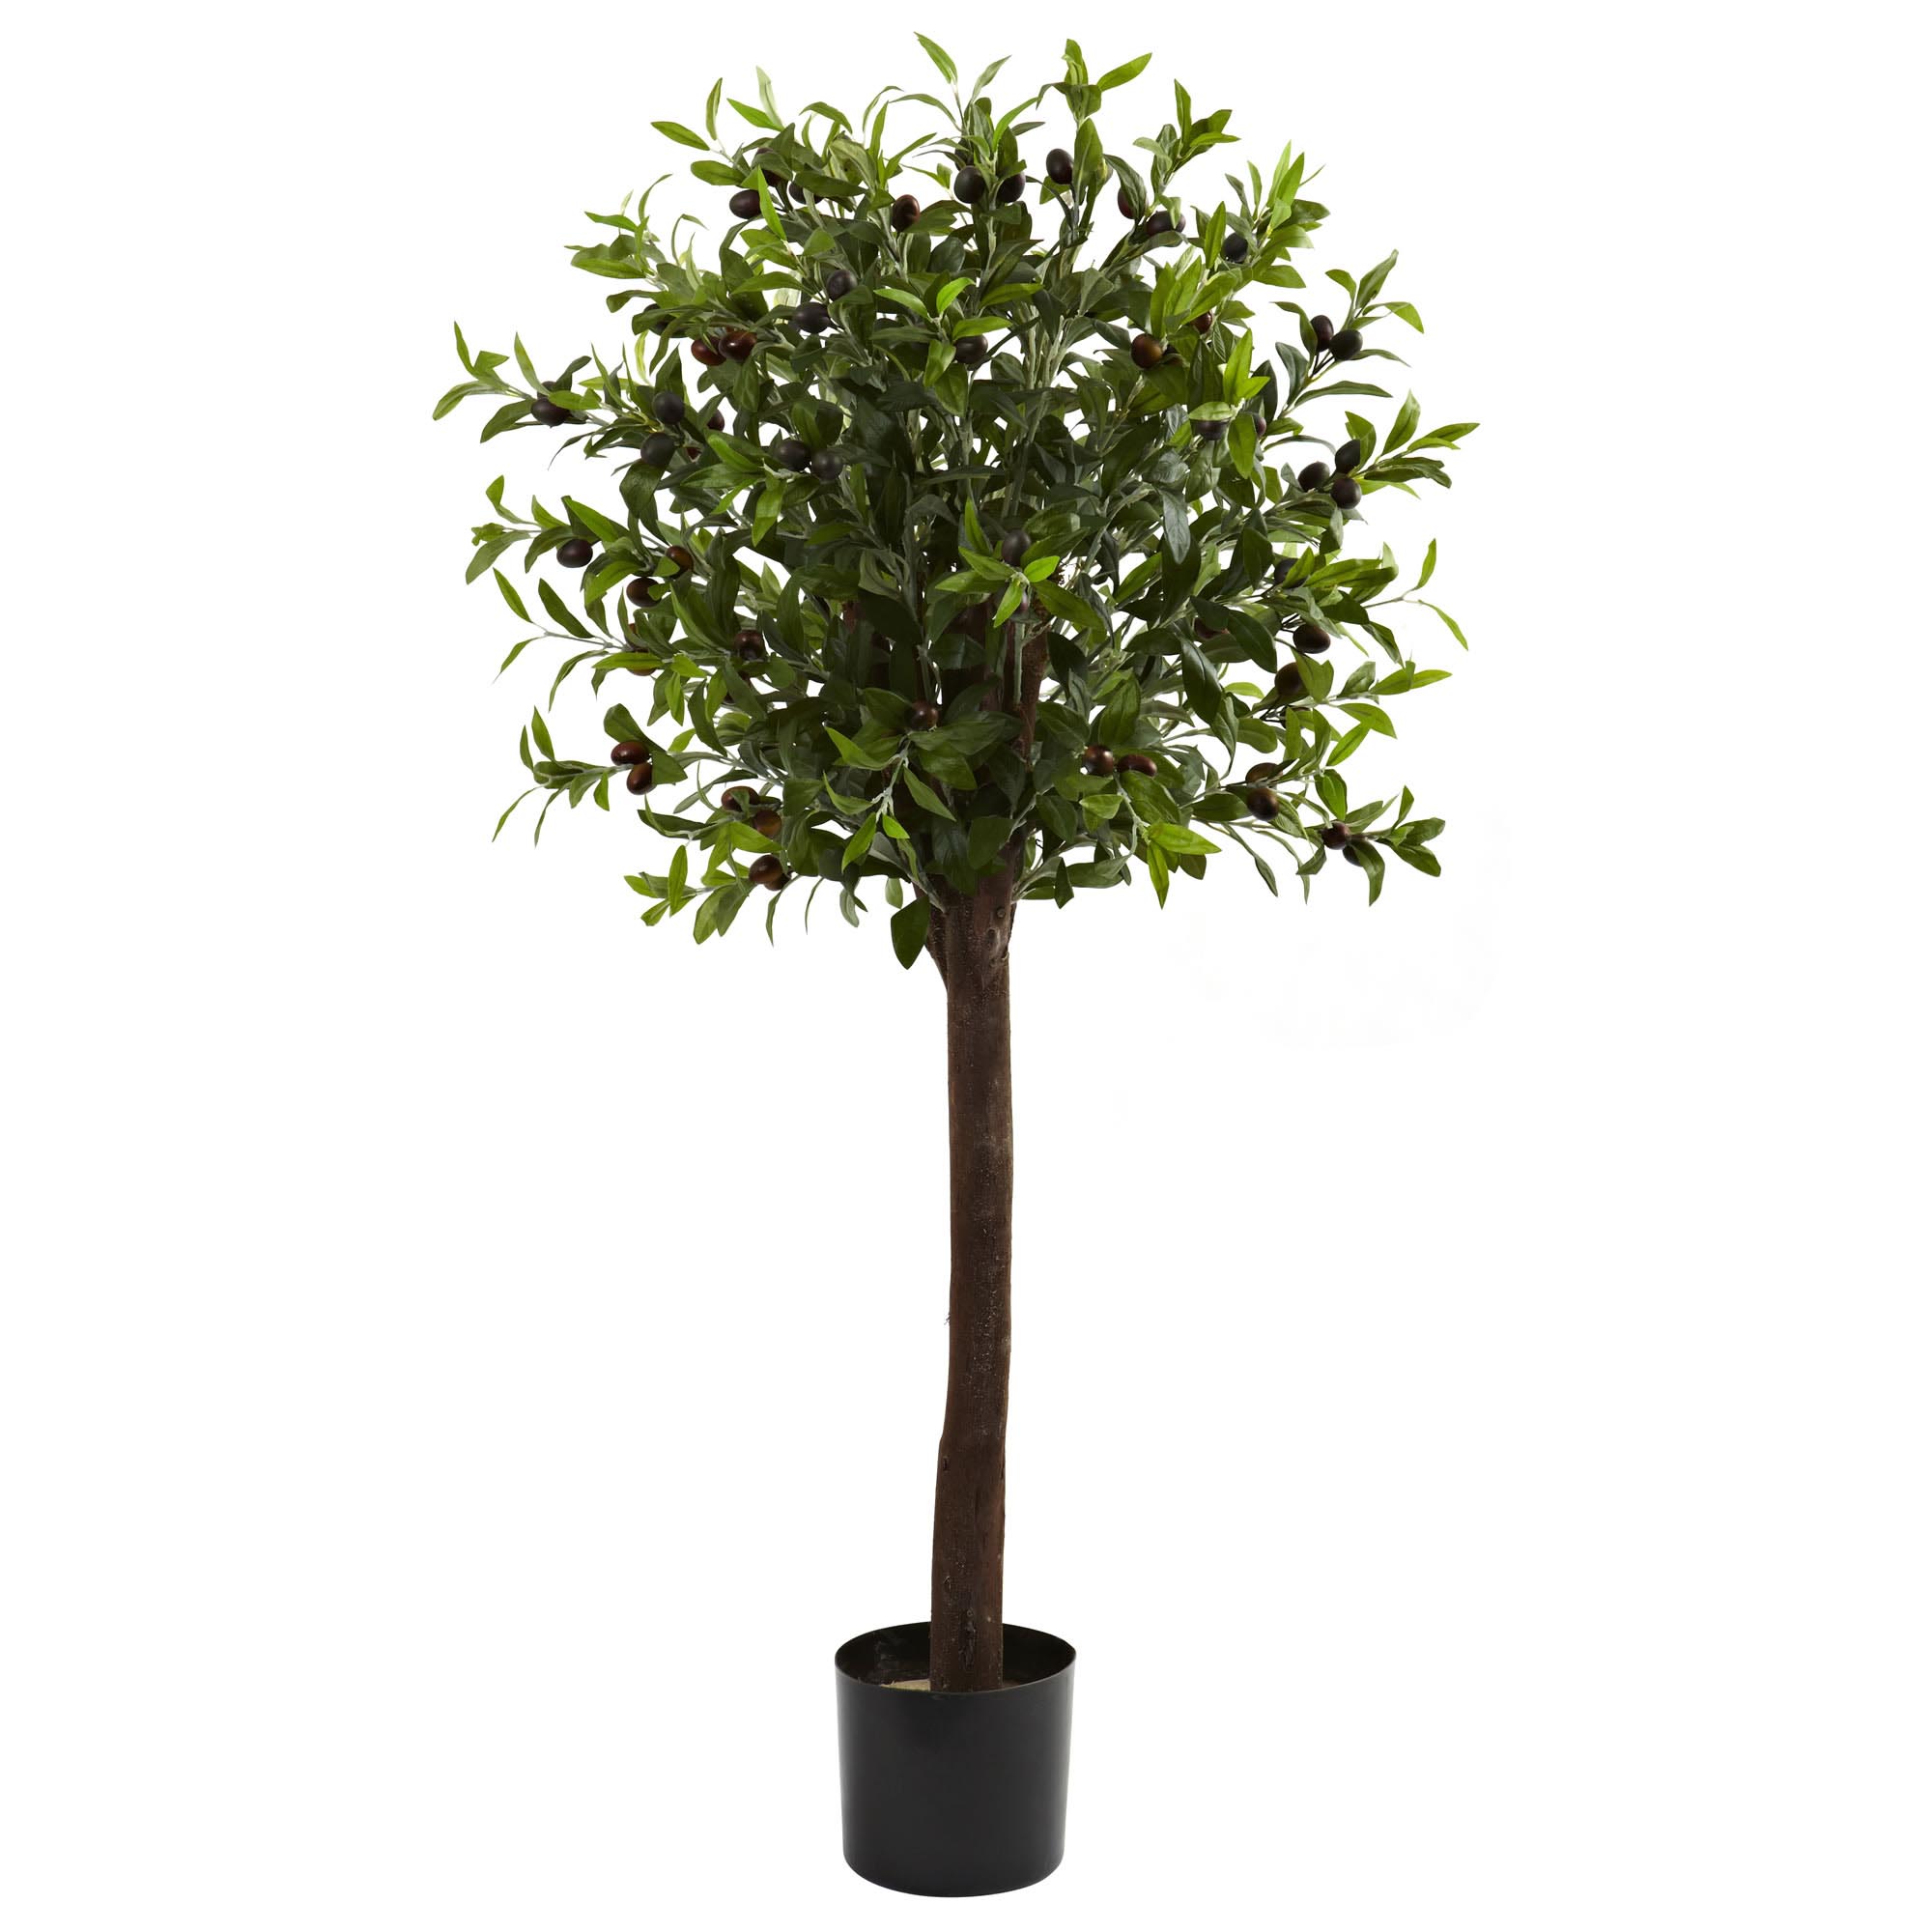 4 foot Artificial Olive Tree: Potted